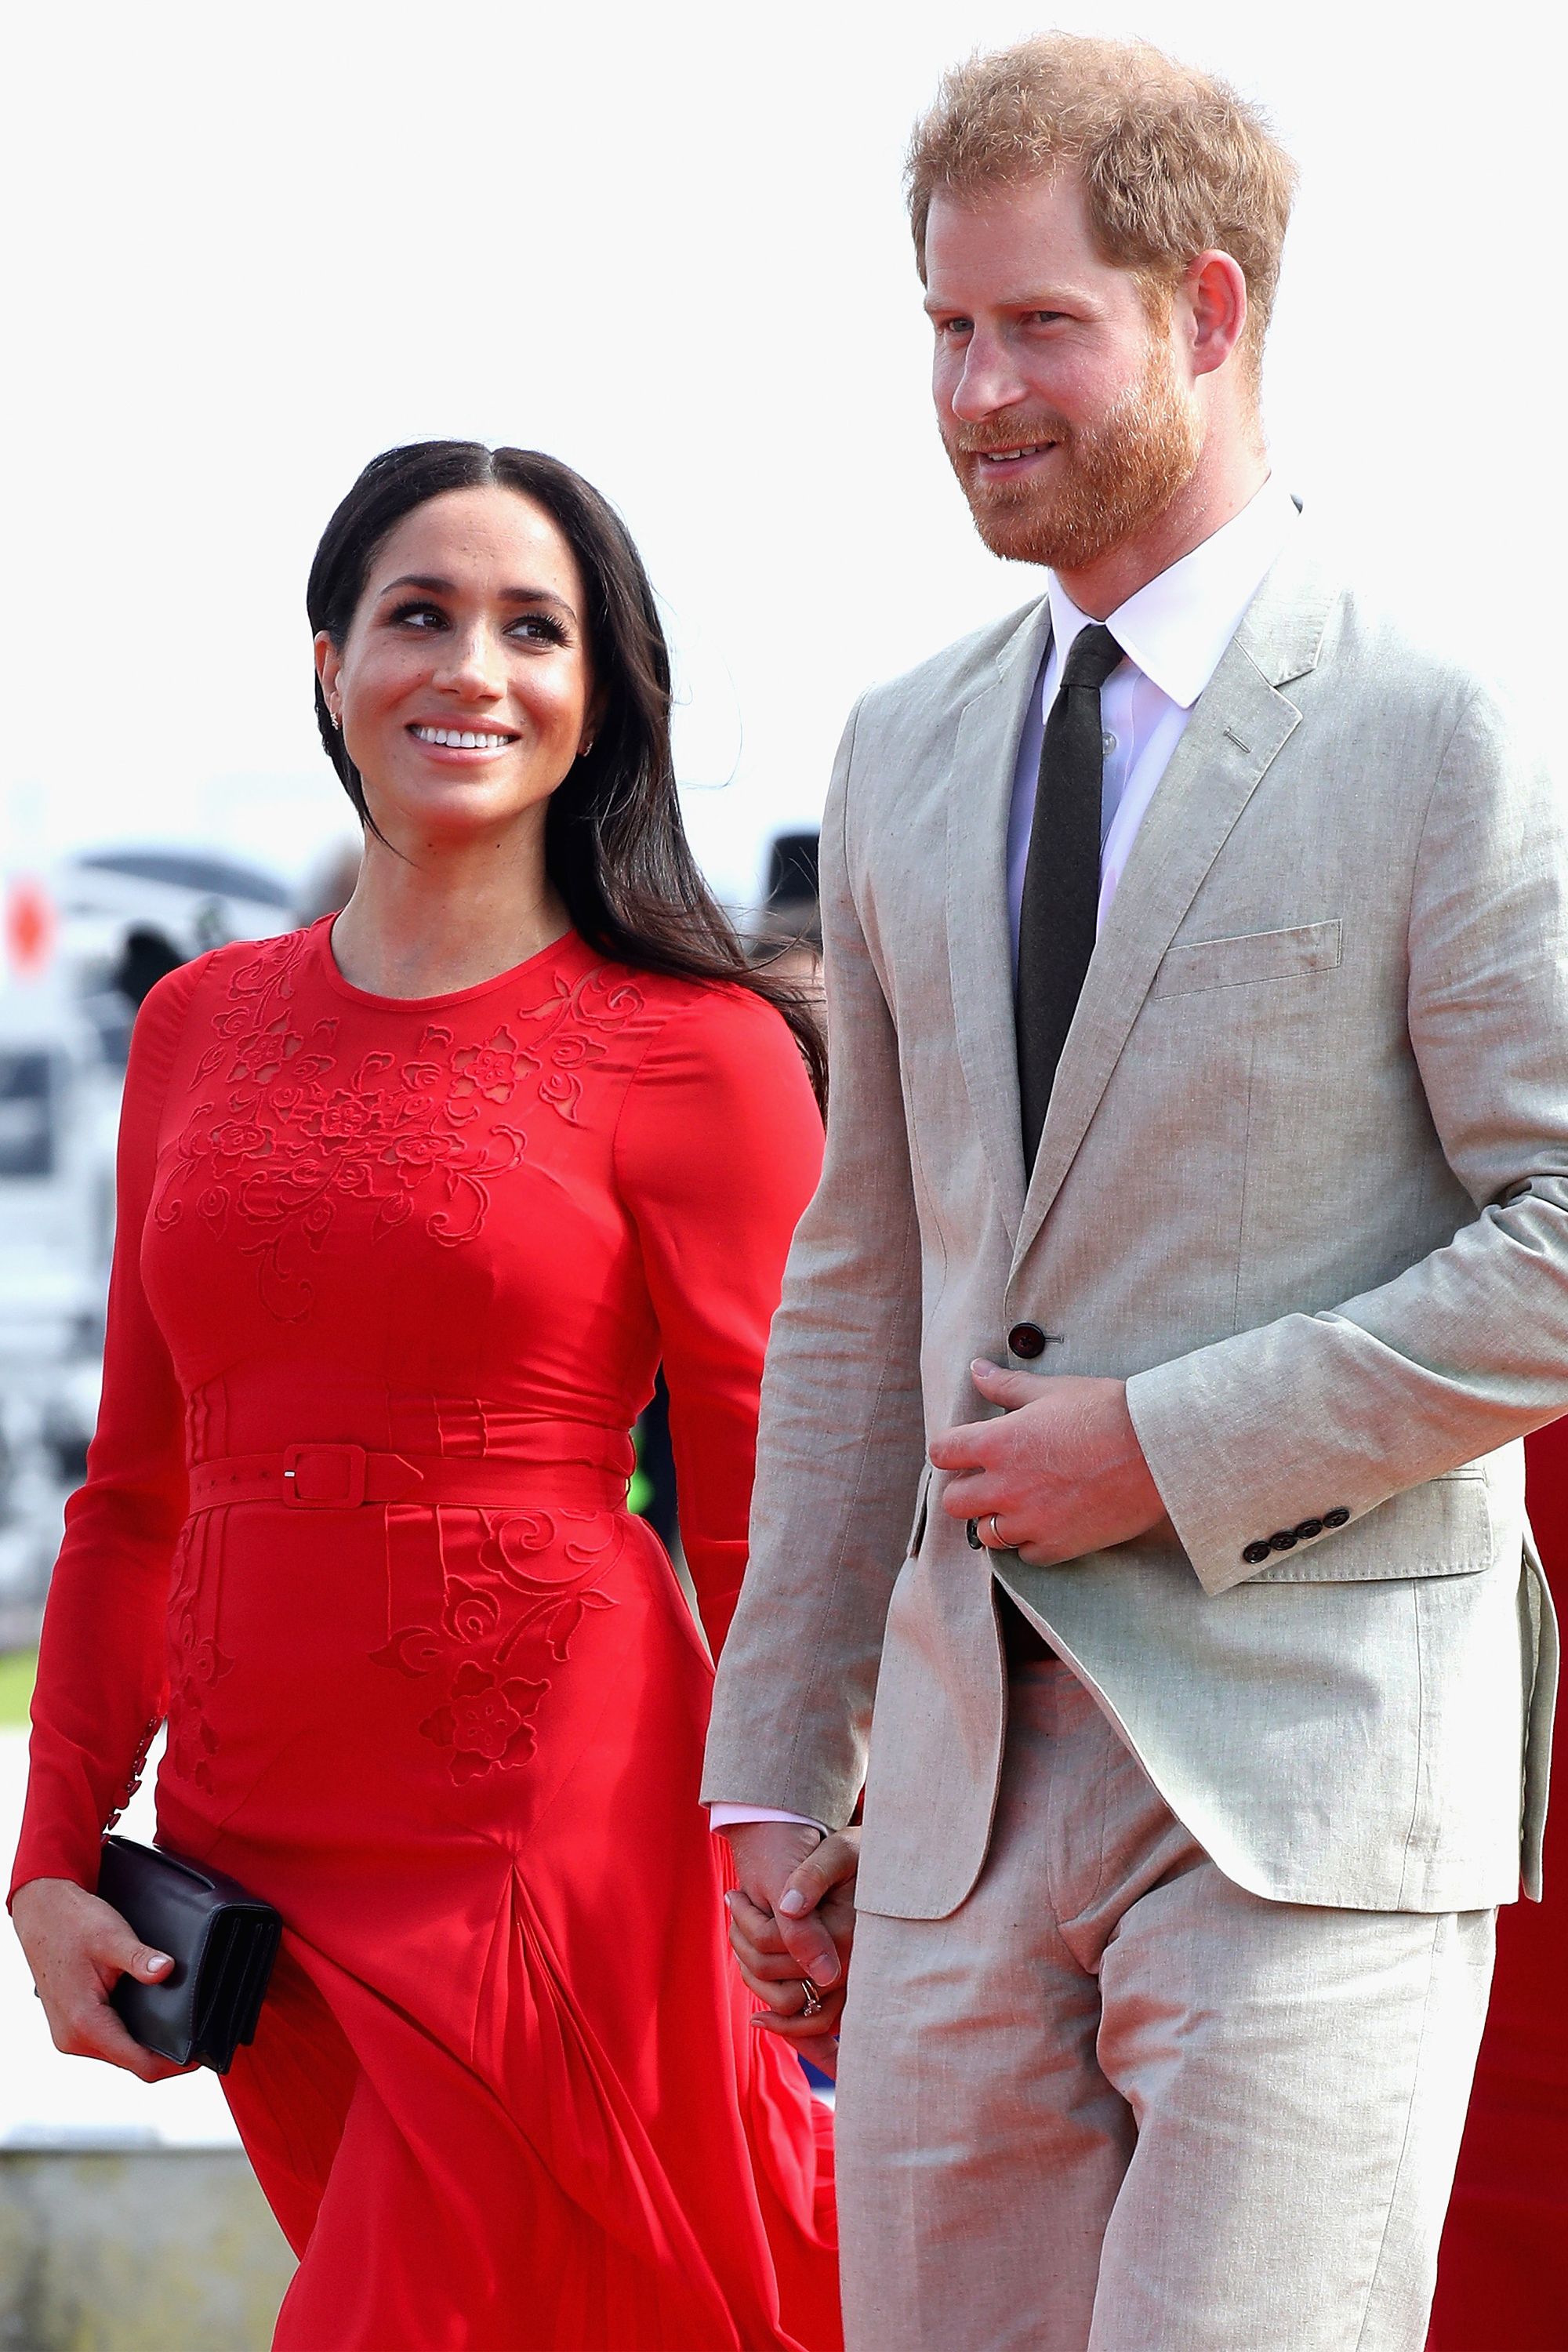 https://hips.hearstapps.com/hmg-prod.s3.amazonaws.com/images/hbz-prince-harry-meghan-markle-cute-moments-2018-10-gettyimages-1053237790.jpg?crop=1xw:1xh;center,top